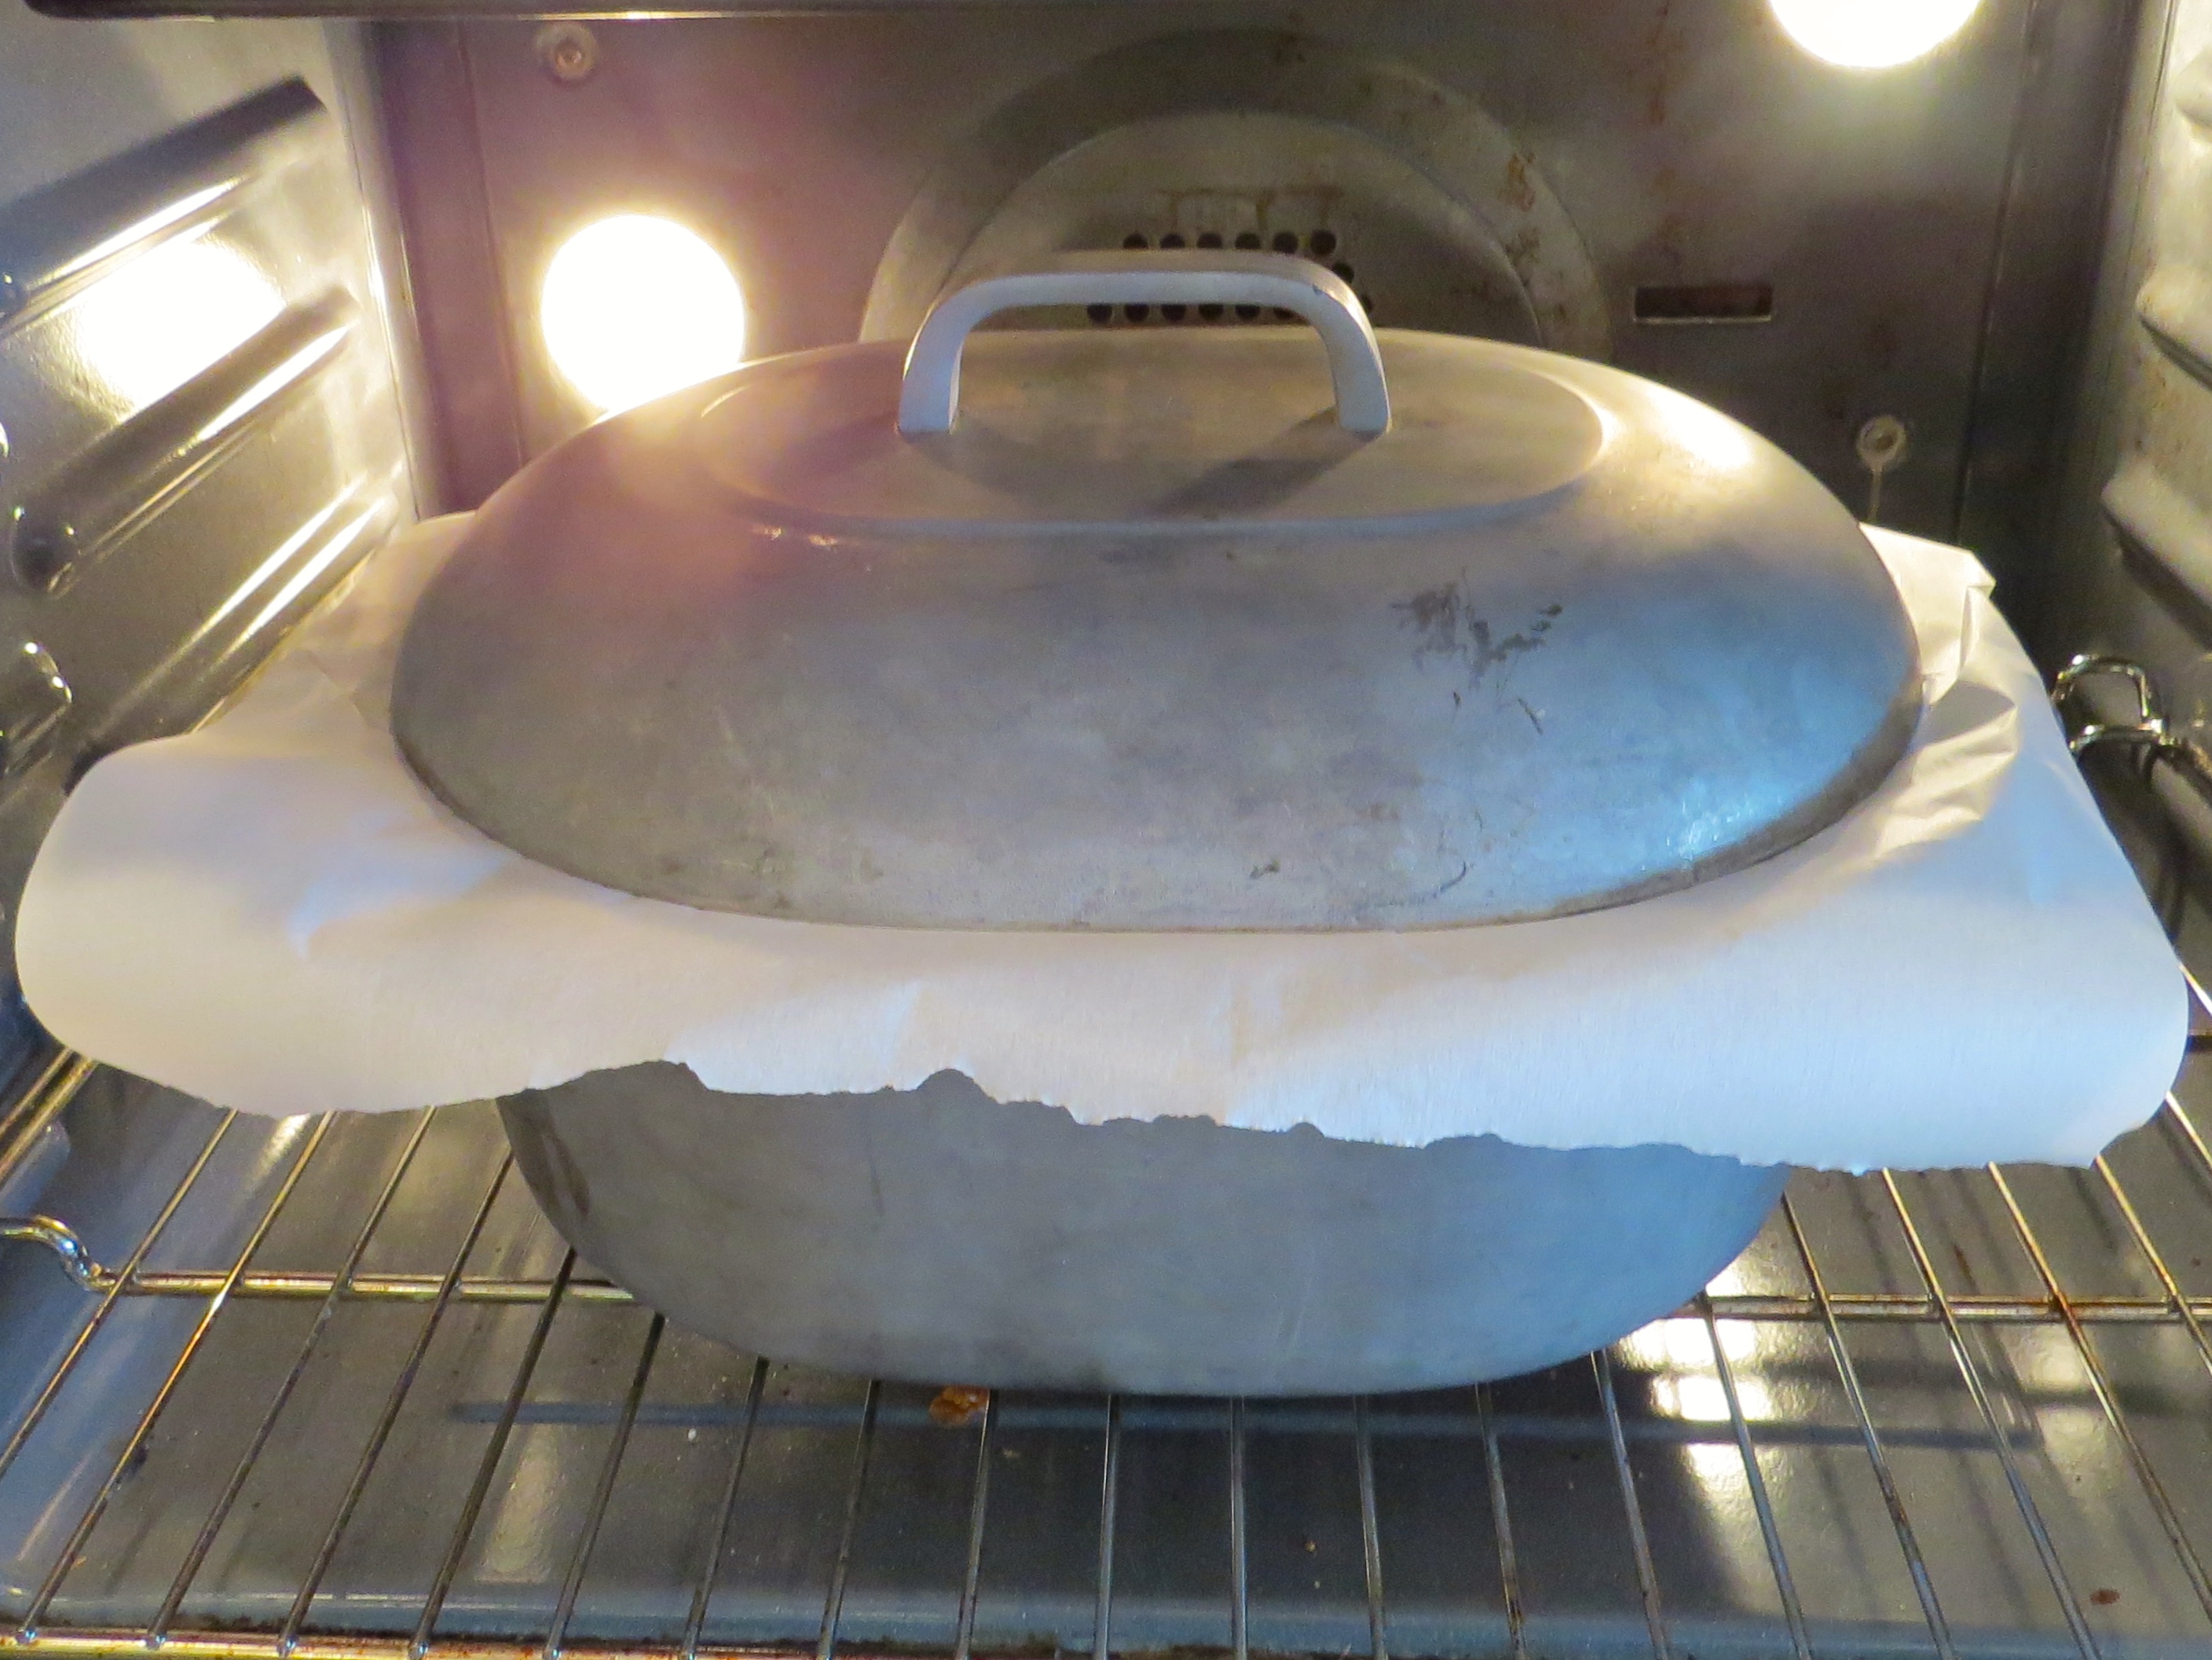 Dorie suggests putting parchment paper between the pan and the lid to keep the liquids from evaporating. A new technique that worked.